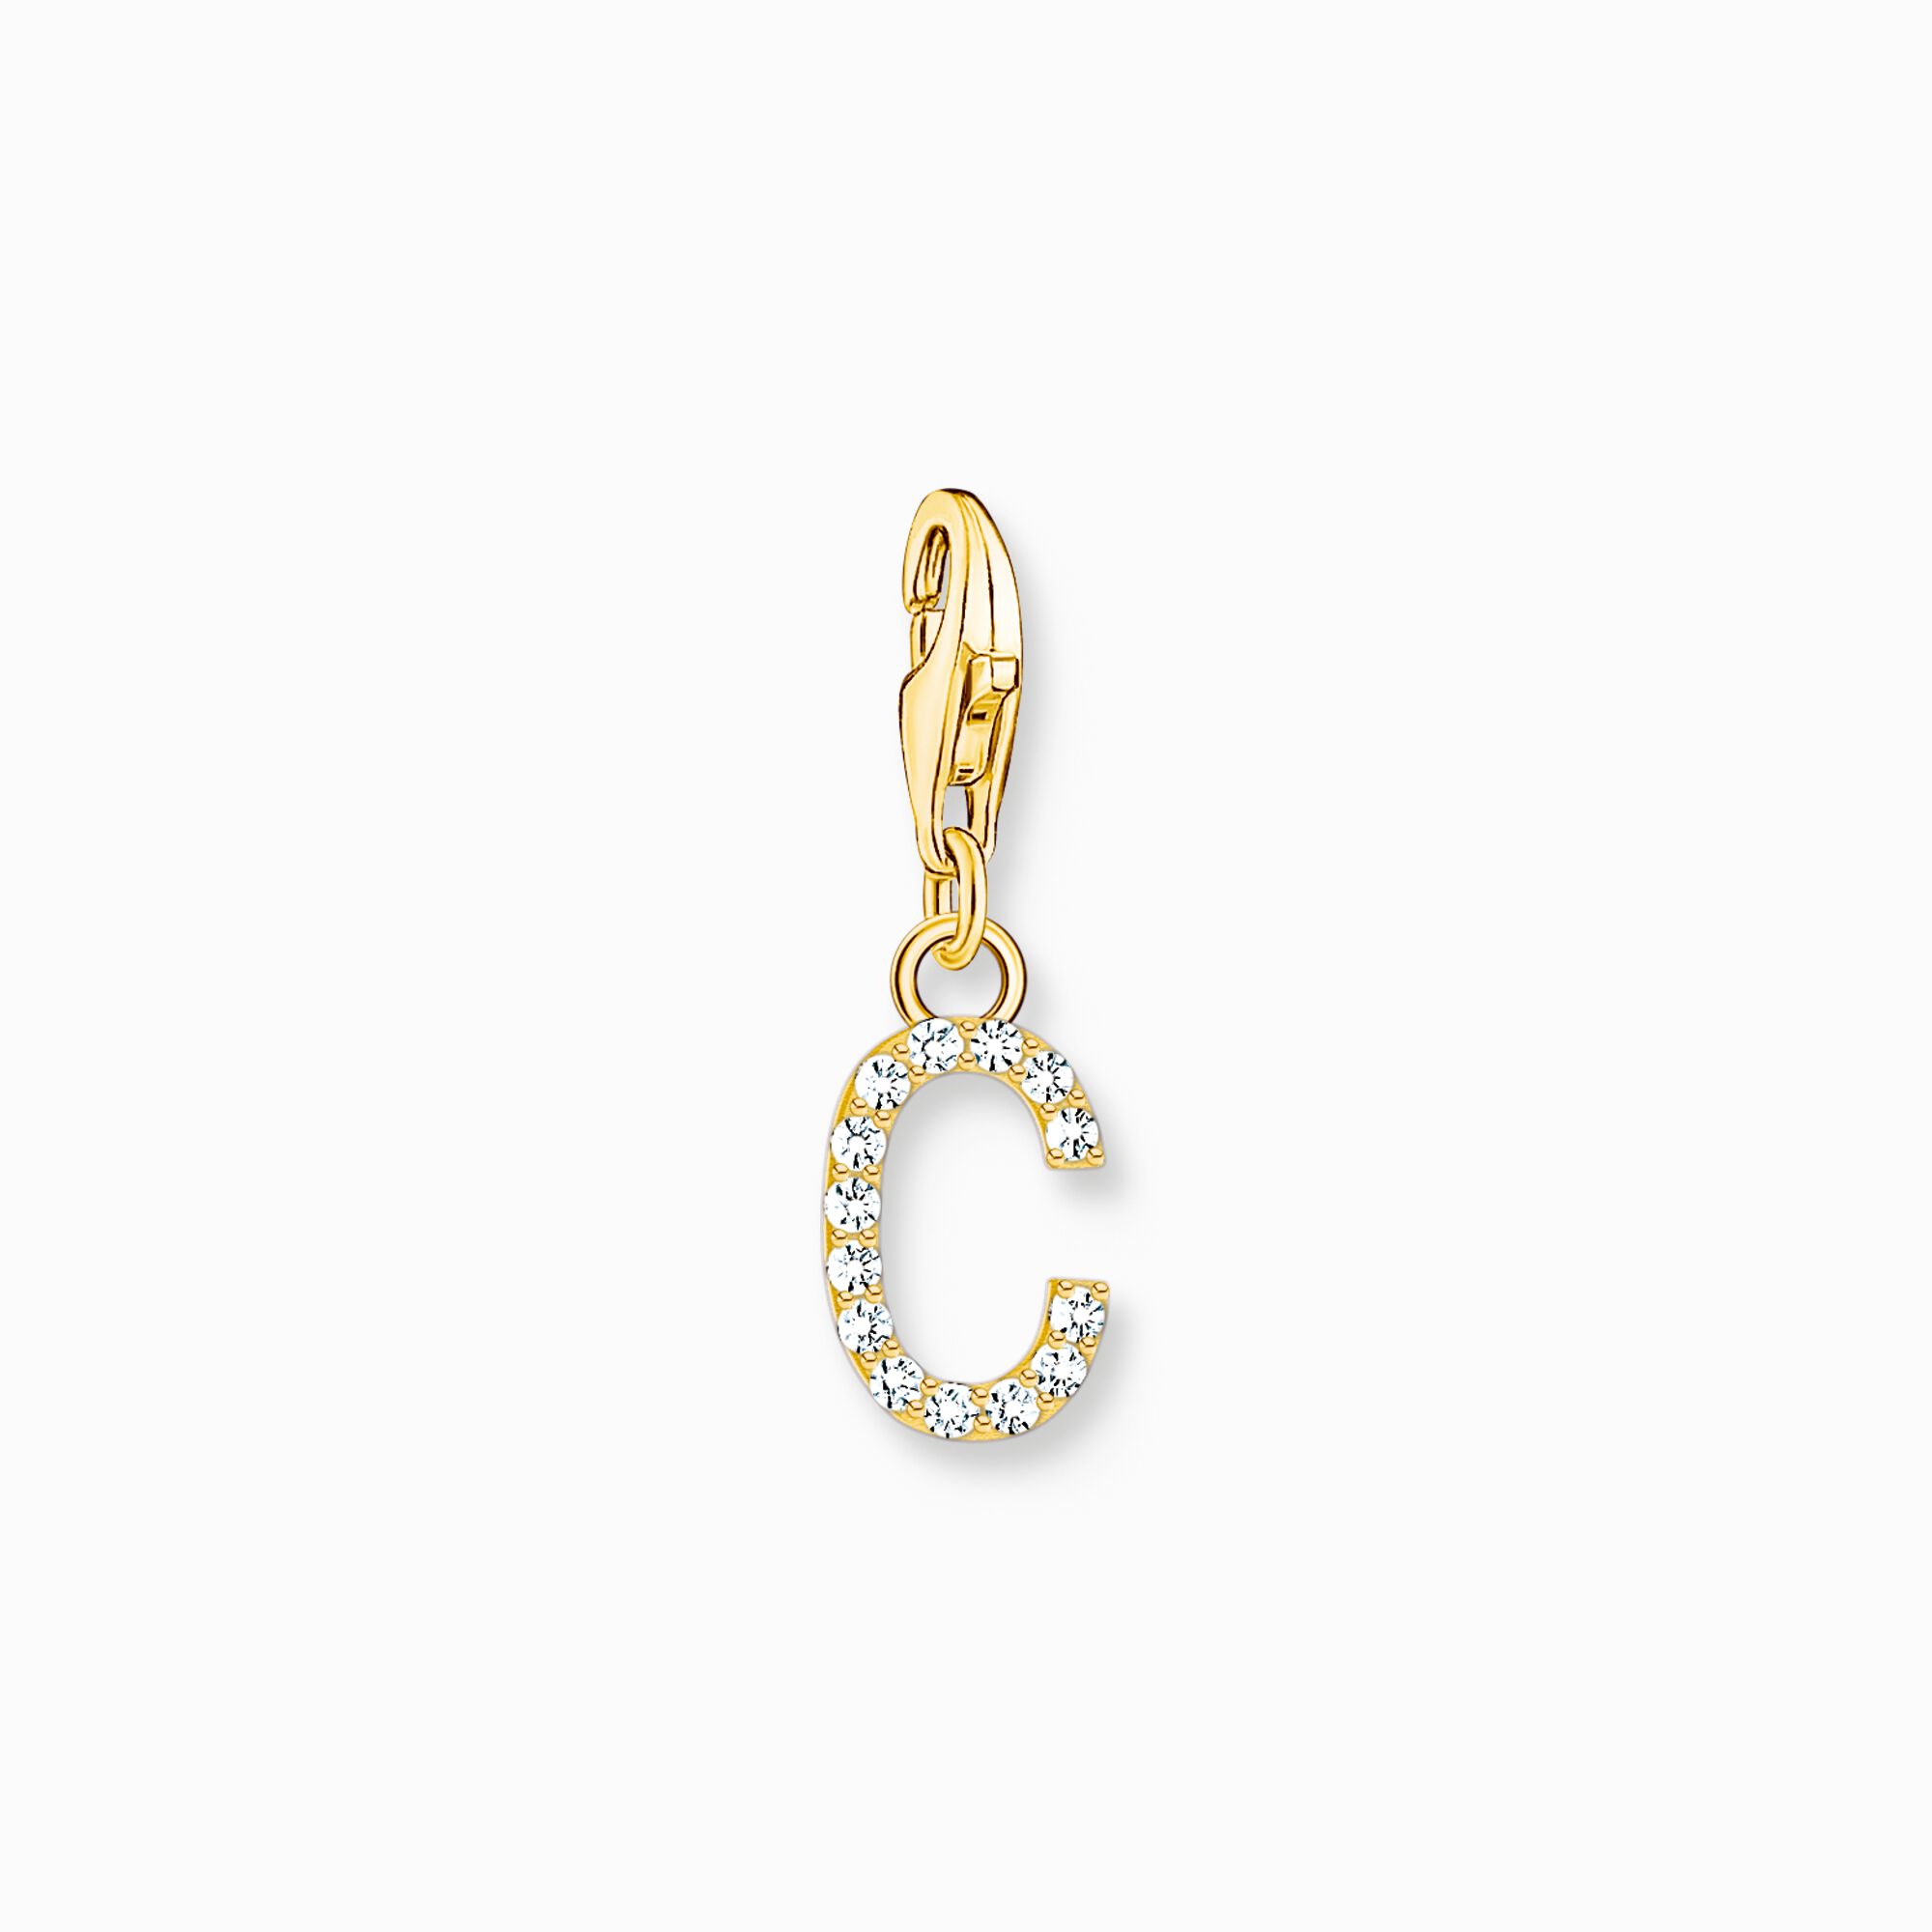 Charm pendant letter C with white stones gold plated from the Charm Club collection in the THOMAS SABO online store